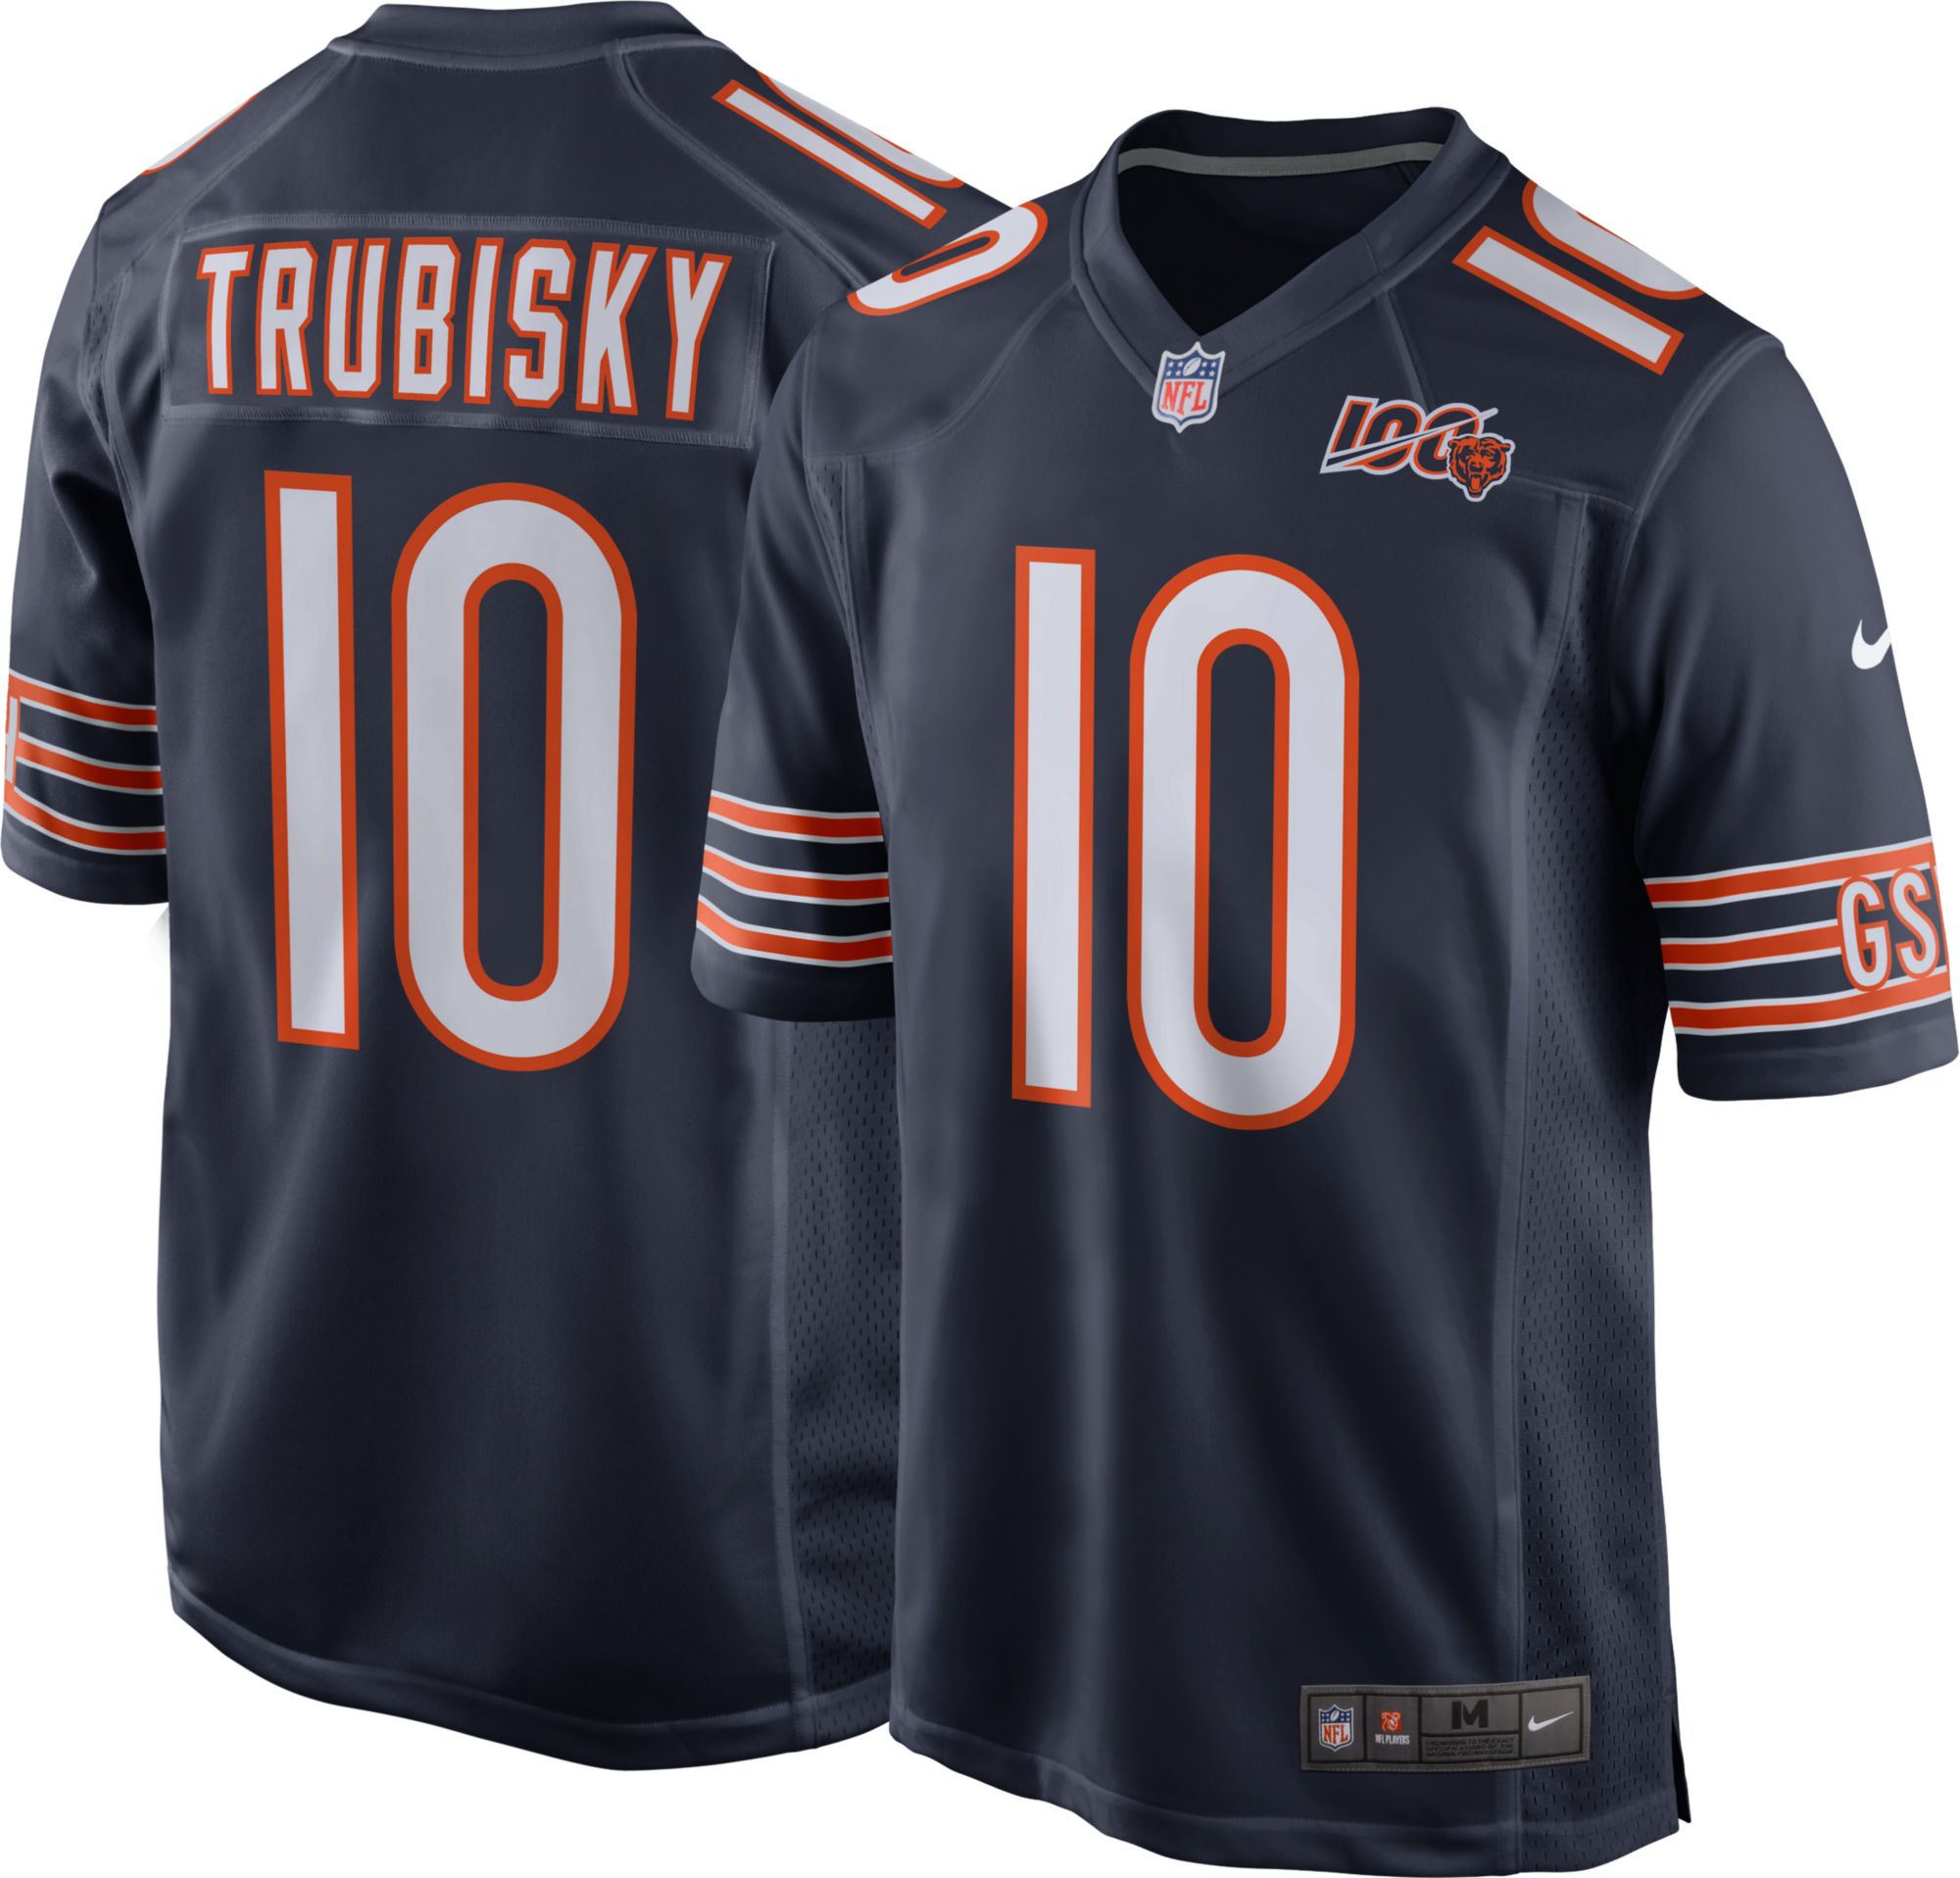 100th nfl jersey